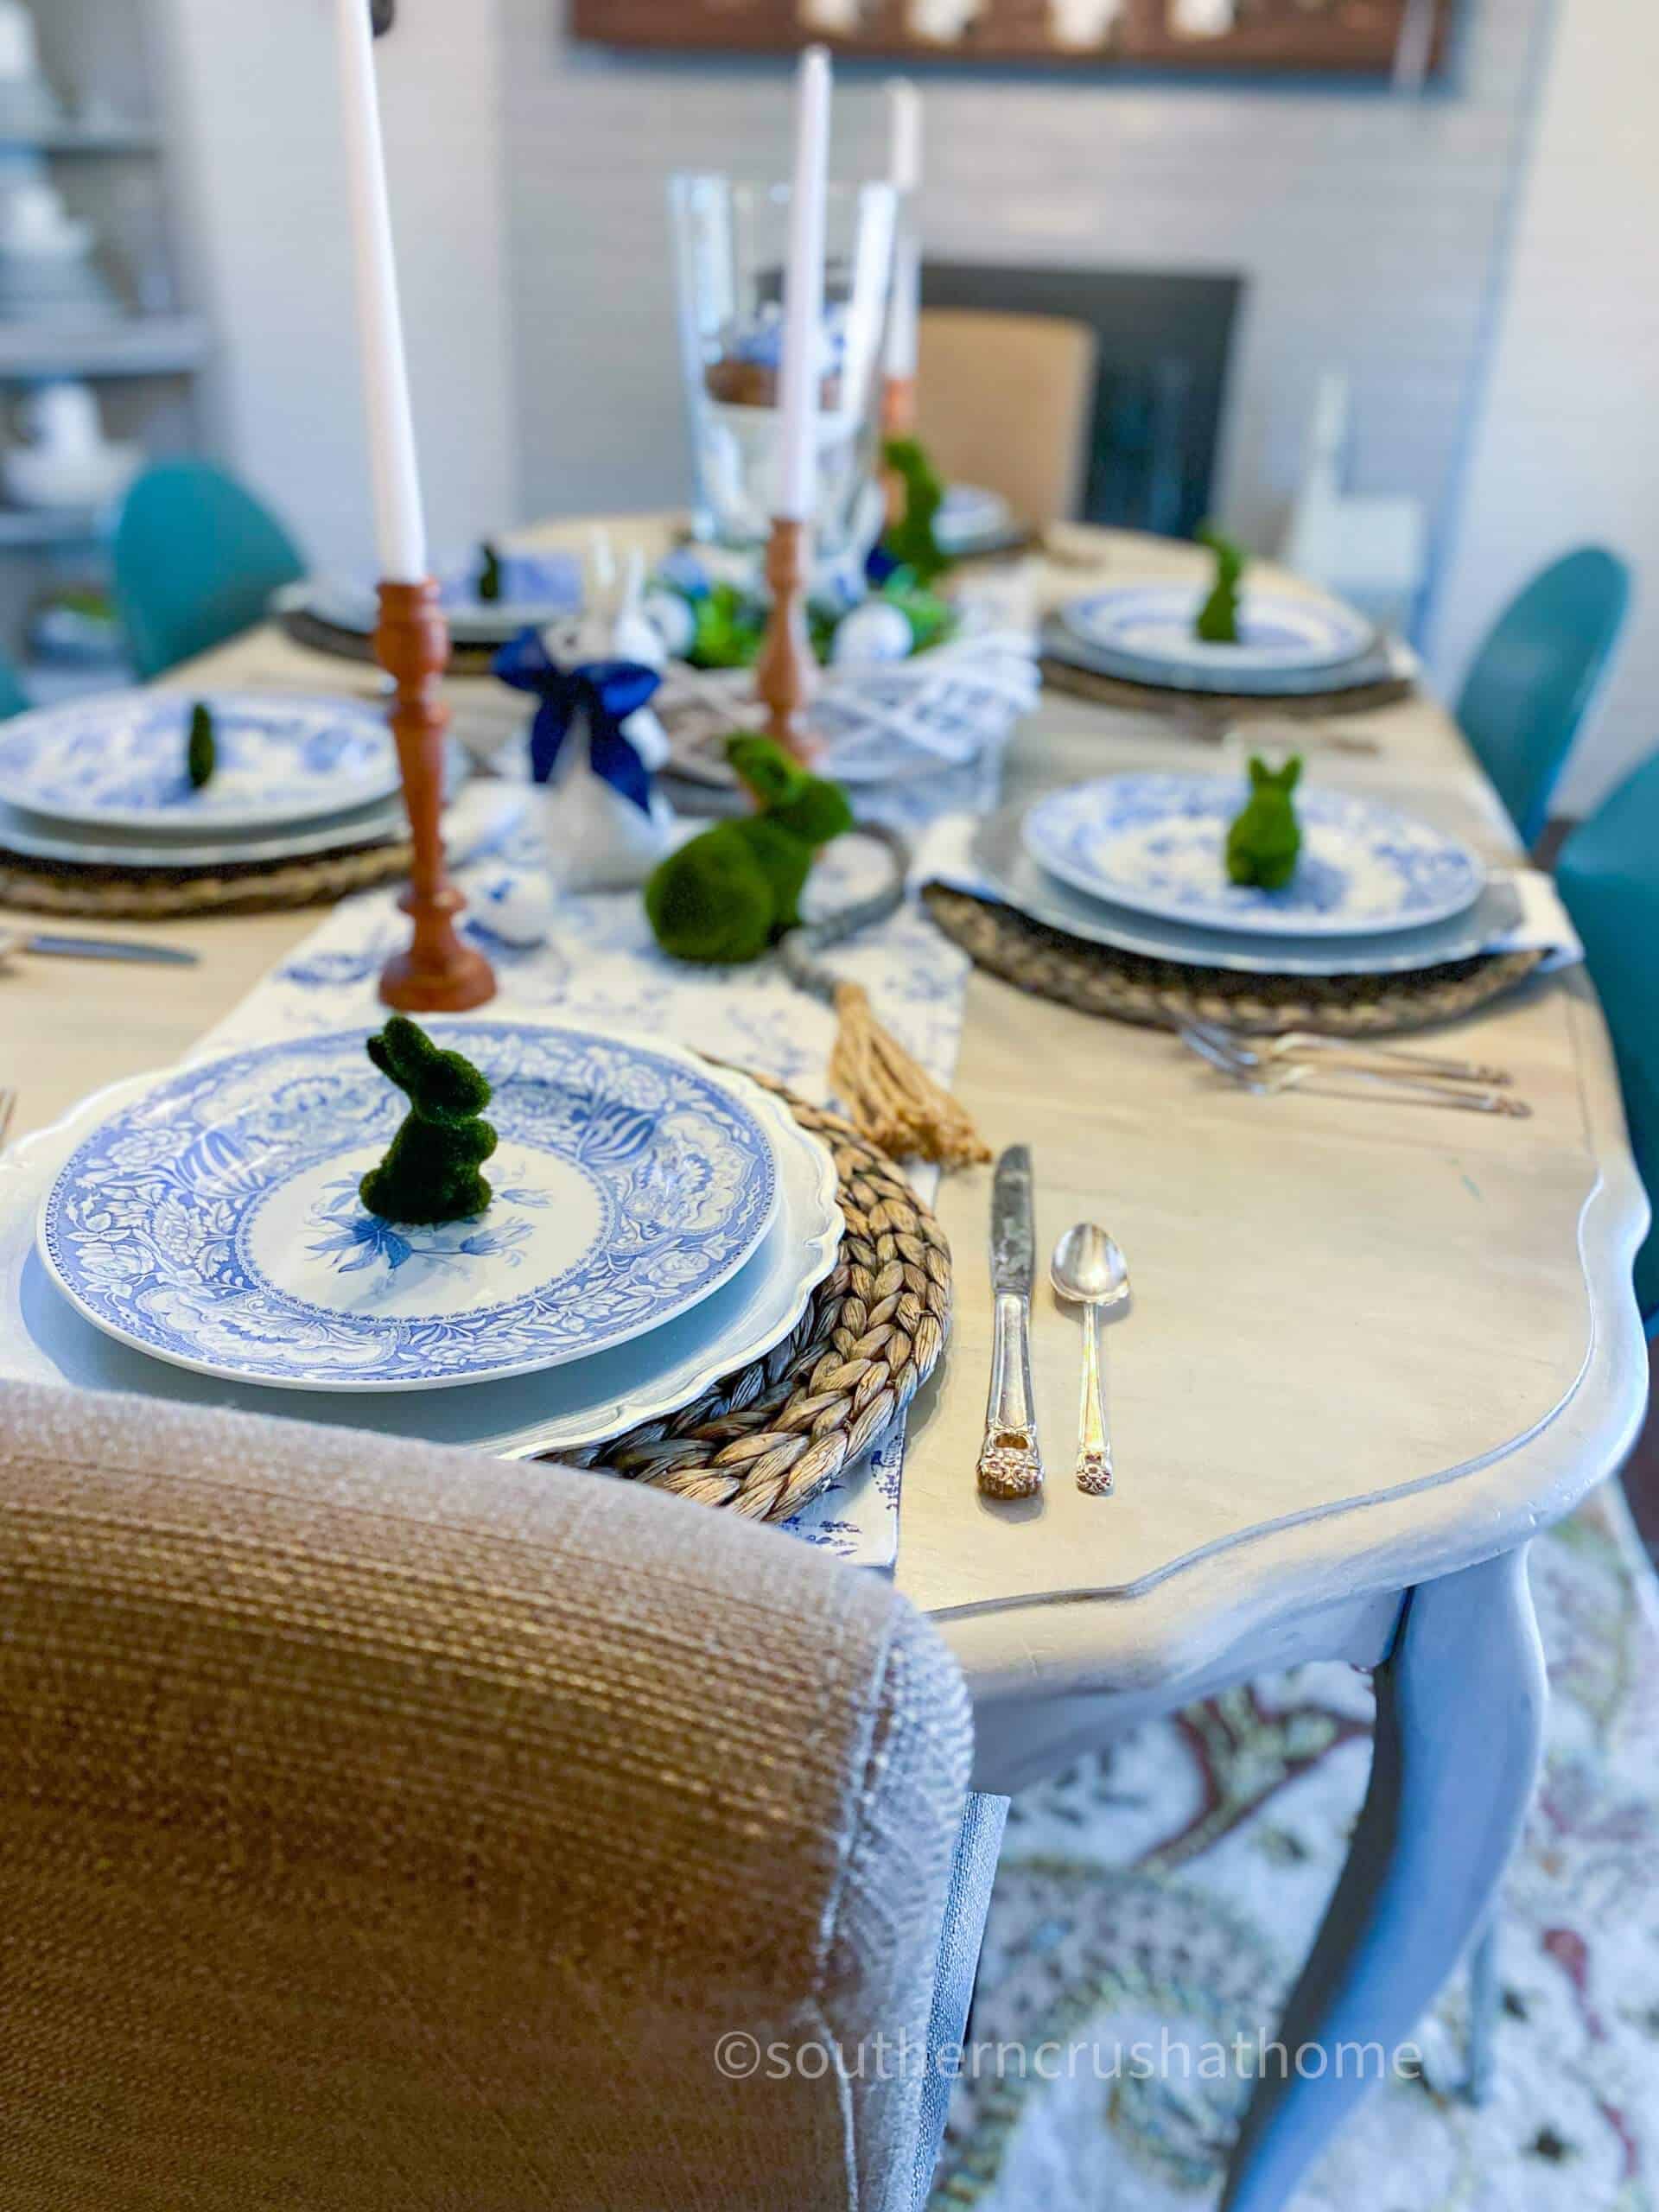 Easter Table Setting Ideas in Blue and White - Southern Crush at Home